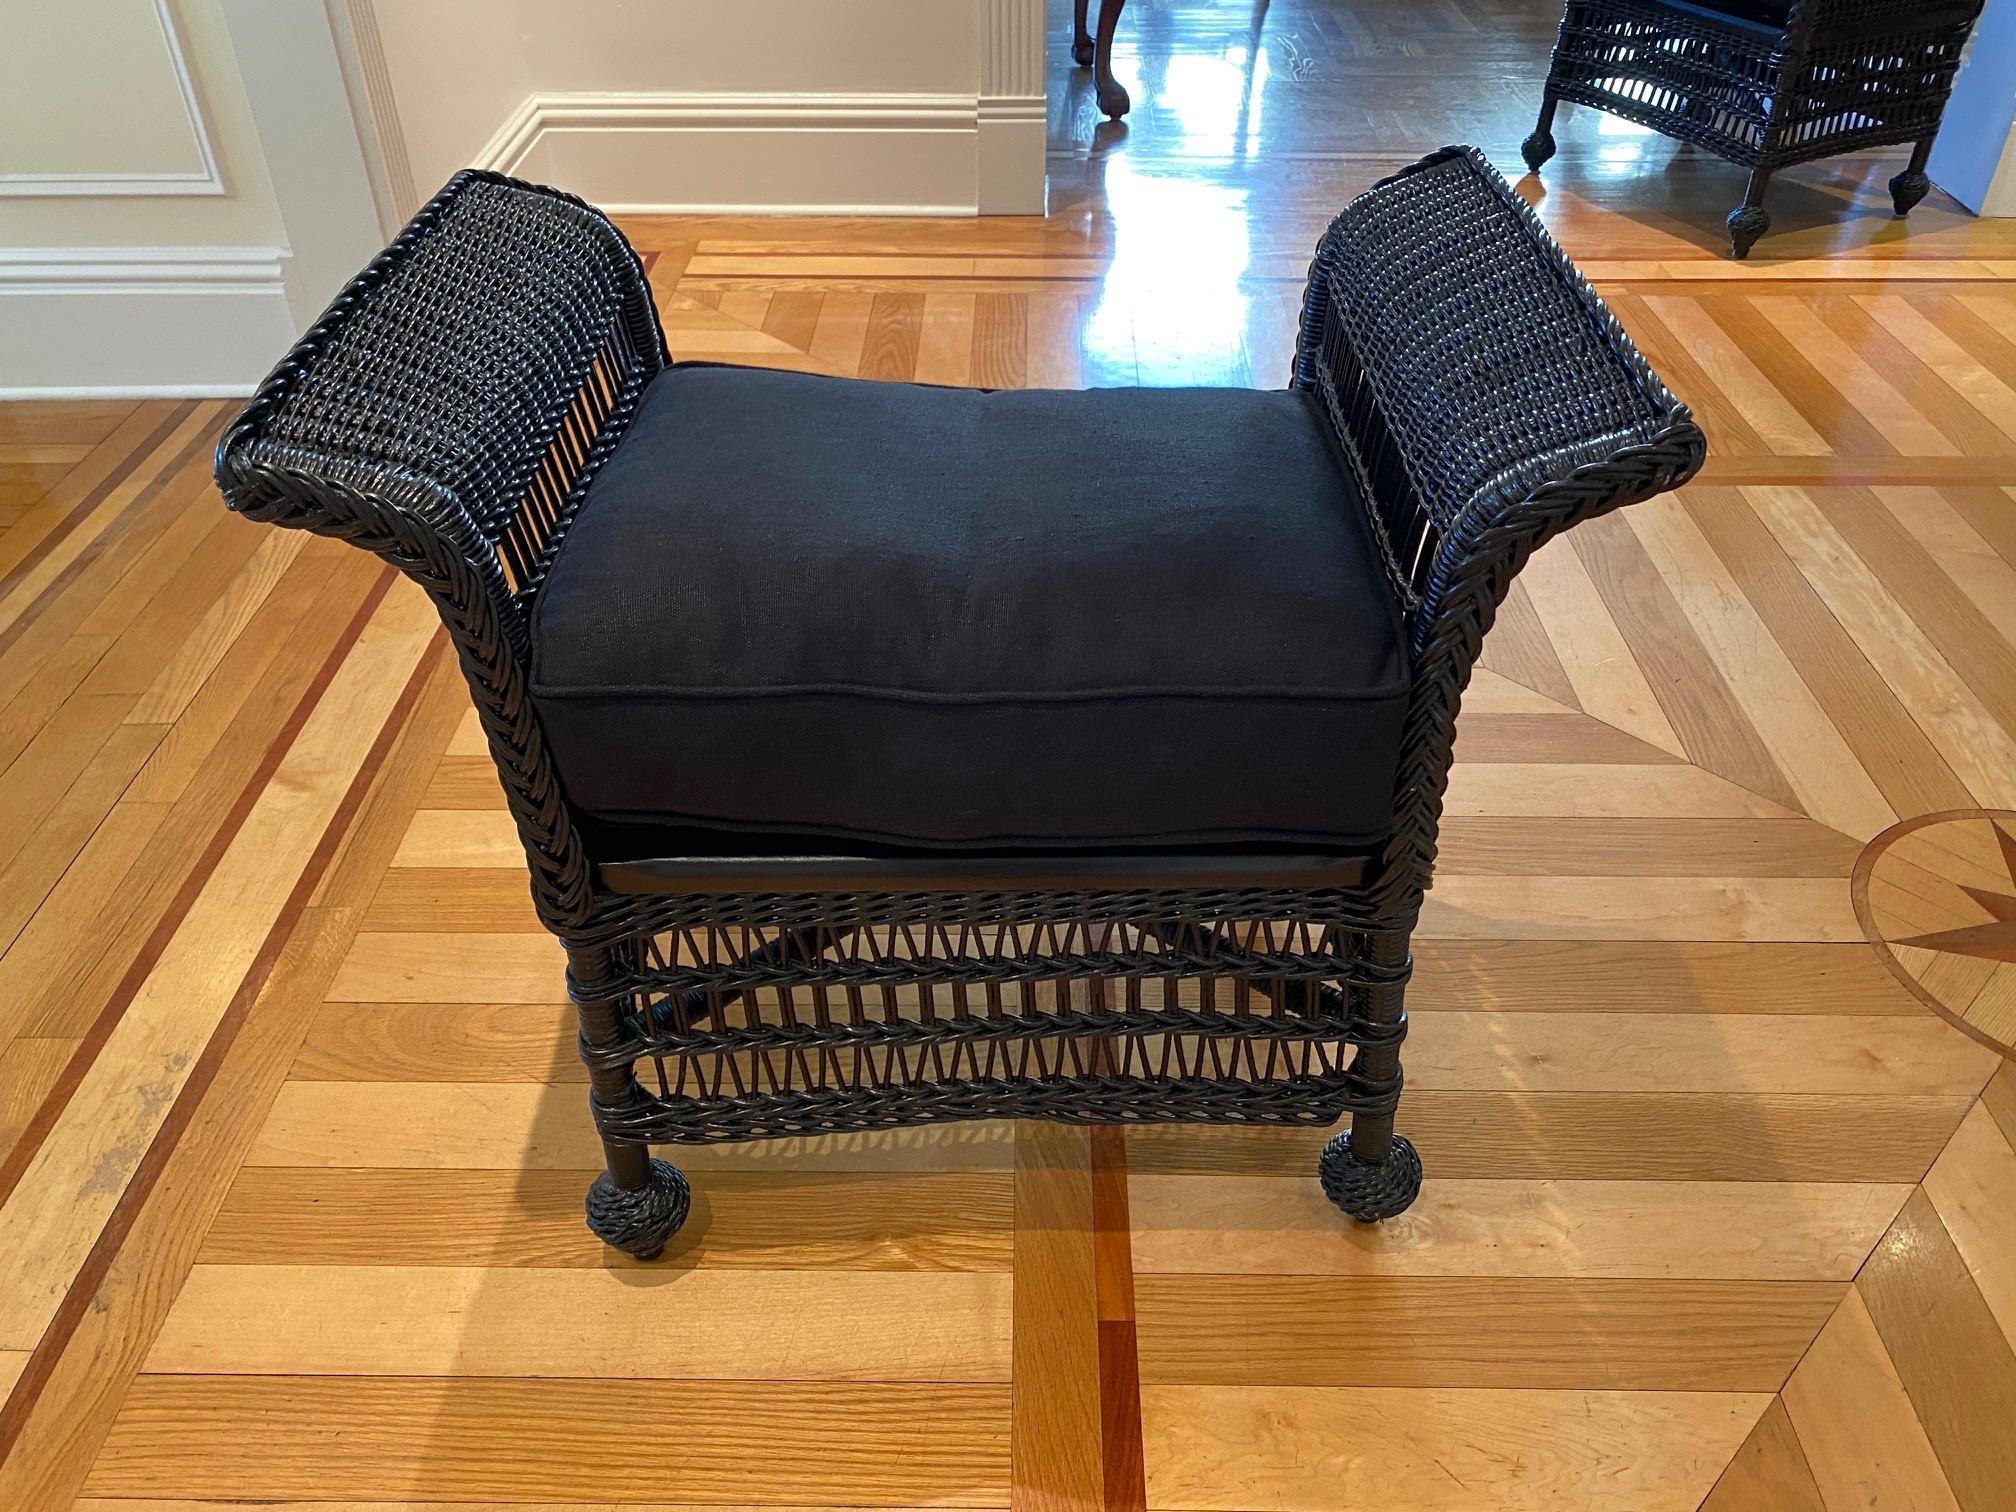 Vintage wicker bench or footstool in black finish, upholstered in black linen.
This is a Classic vintage wicker piece was updated with a sharp black finish and upholstered in a single cushion in black linen. Please note this is part of a larger